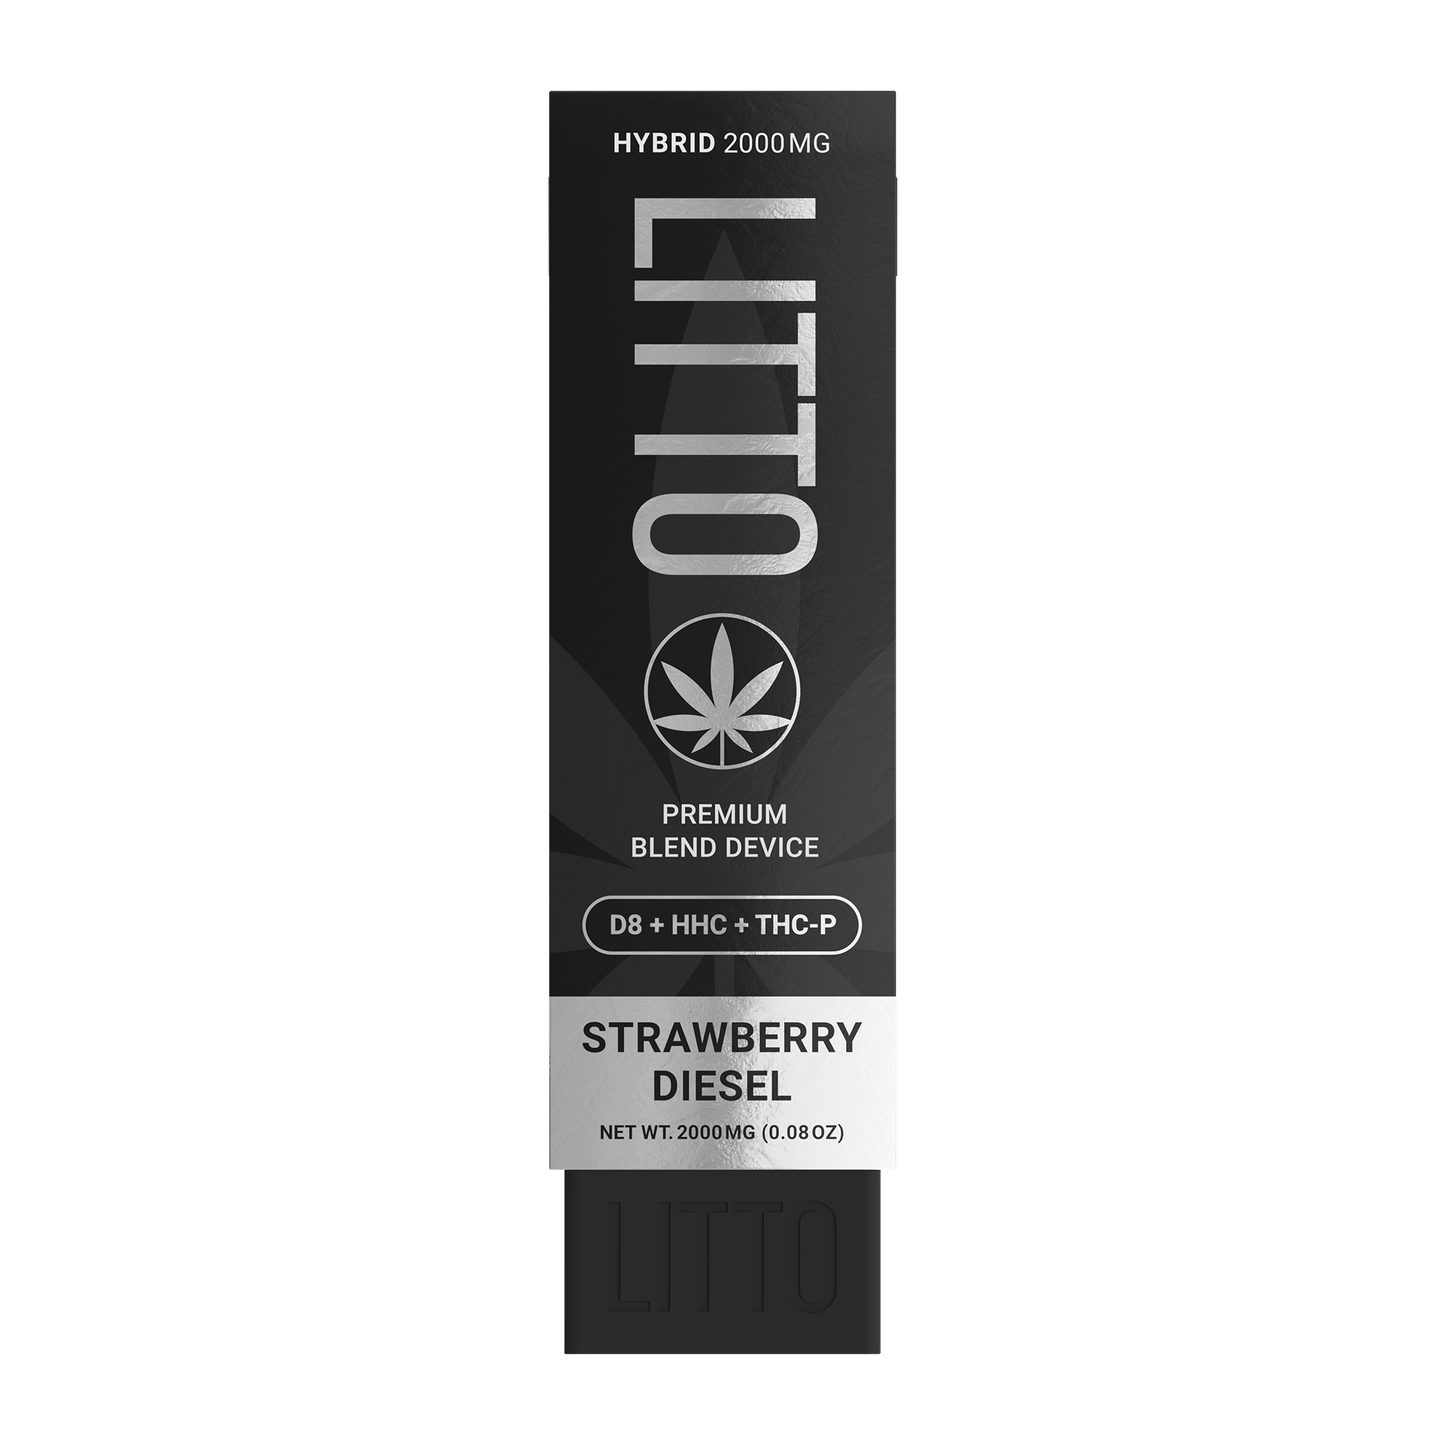 LITTO - Tri Blend - Delta 8 - HHC - THCP - Disposable - Strawberry Diesel - 2G - Burning Daily